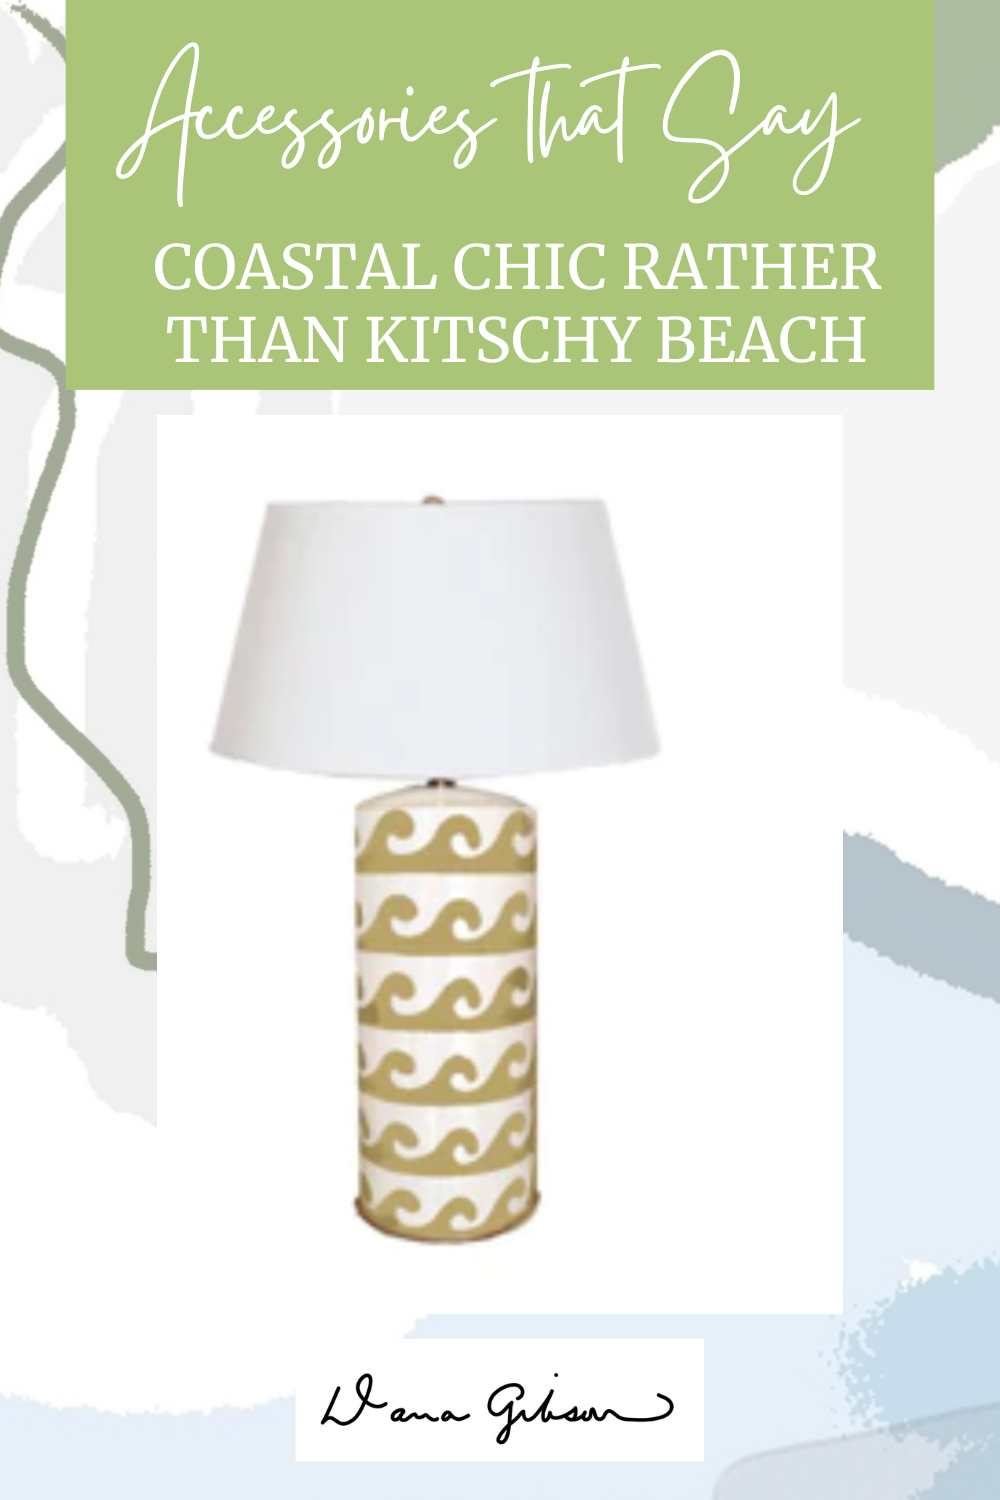 Accessories that Say: Coastal Chic Rather  than Kitschy Beach